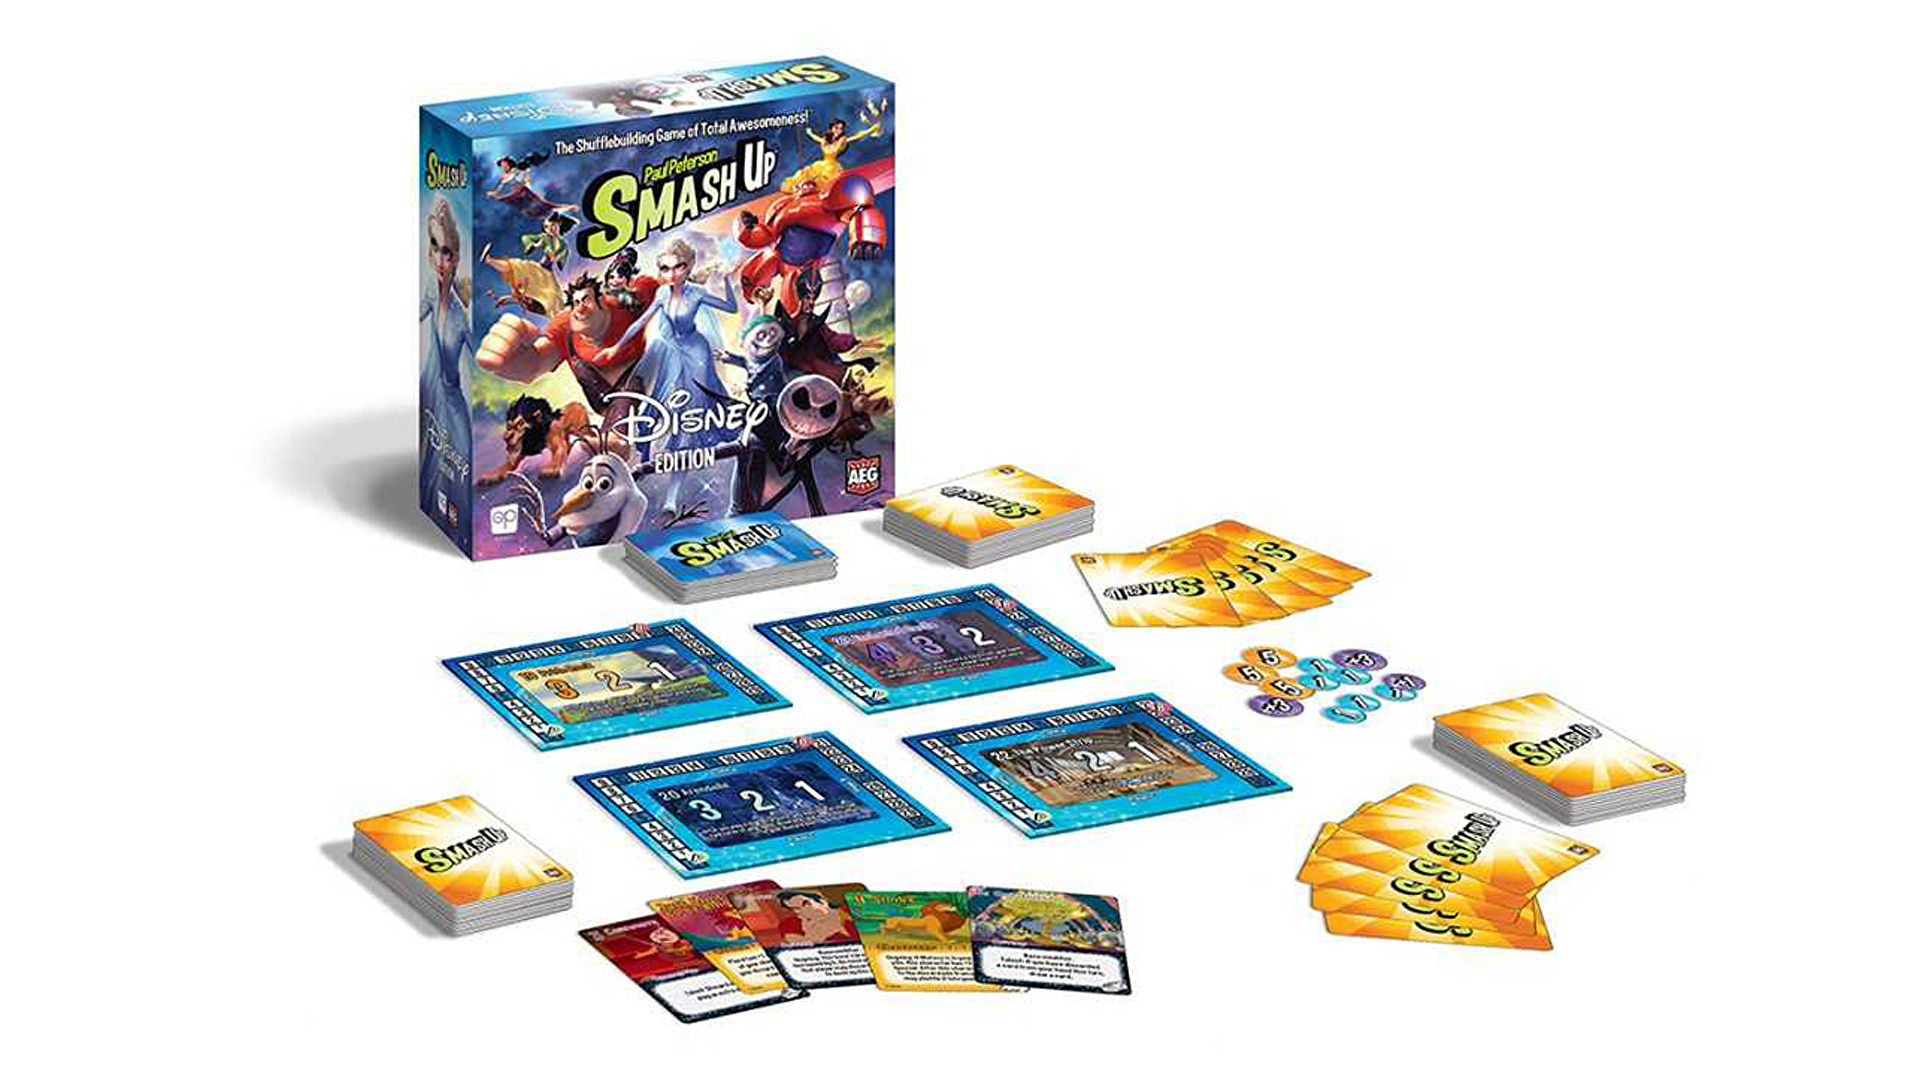 [Boardgames] Disney officially joins the boardgame universe Smash Up!